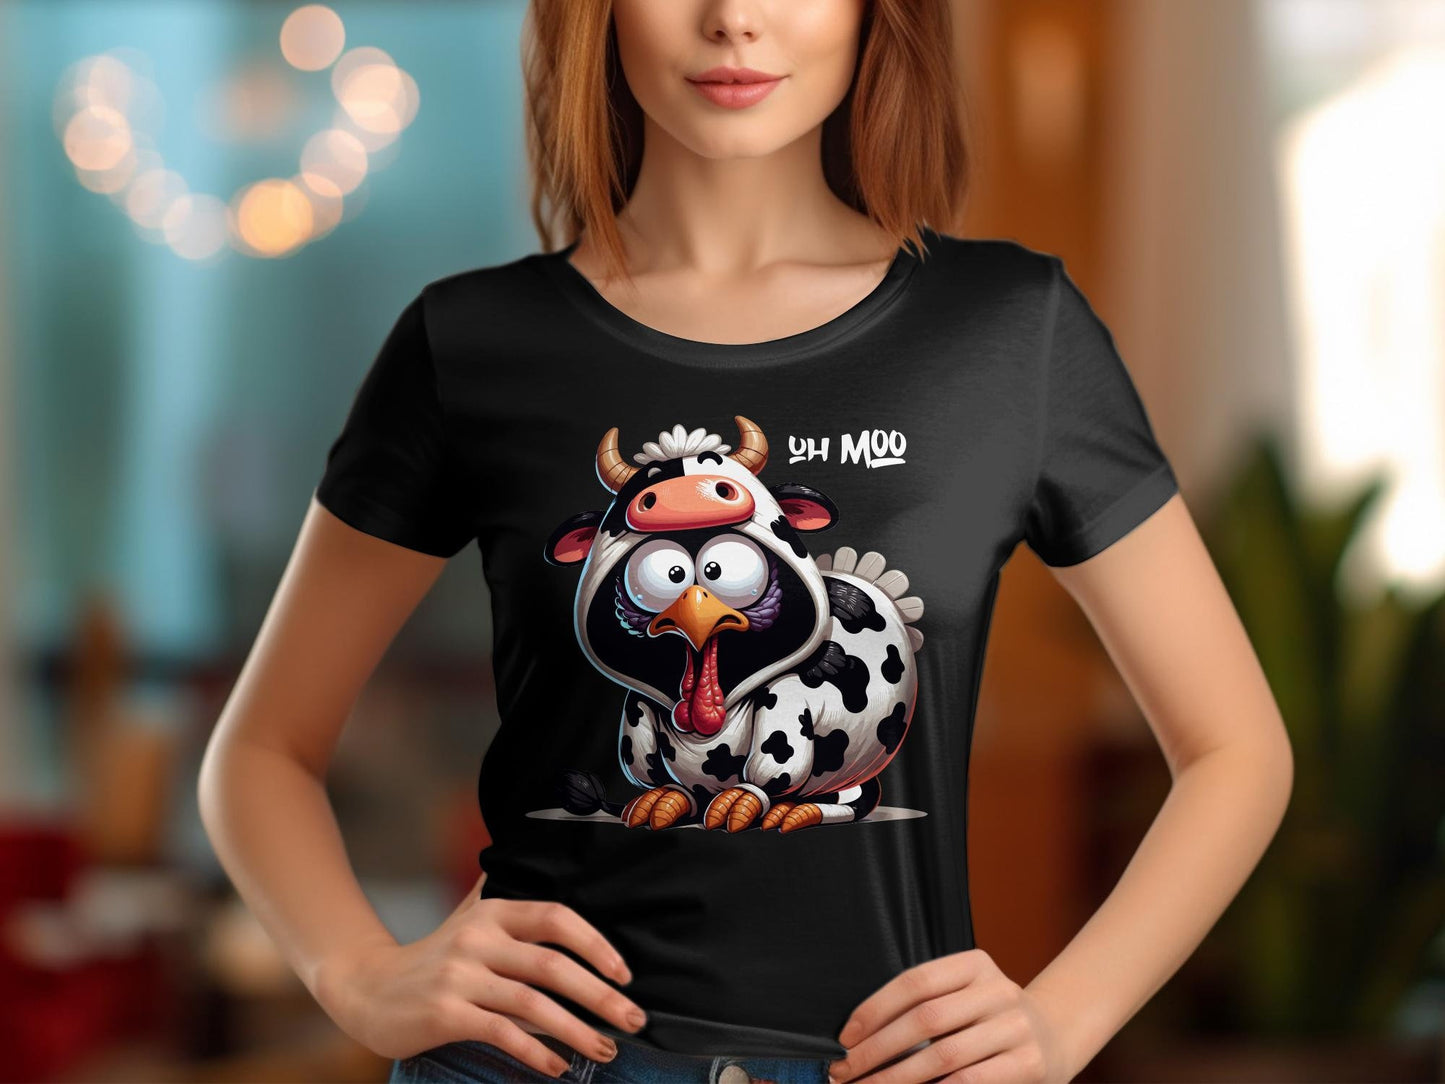 Turkey Dress Up Like a Cow in Disguise T-Shirt - Funny Thanksgiving Tee Shirt, Turkey, Thanksgiving Family Dinner